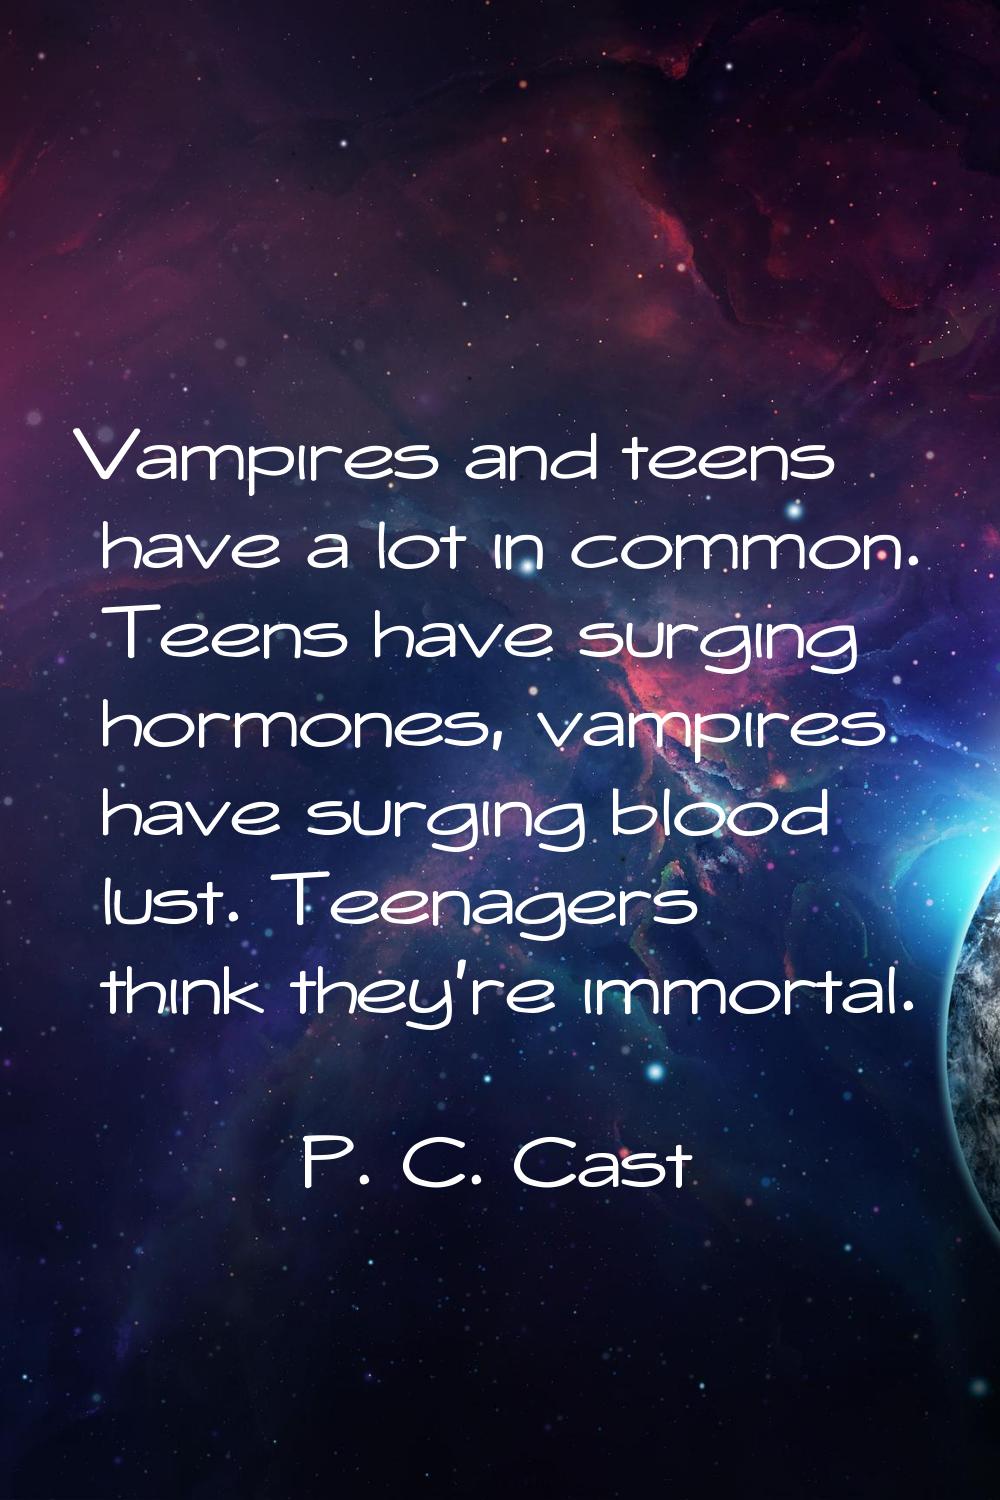 Vampires and teens have a lot in common. Teens have surging hormones, vampires have surging blood l